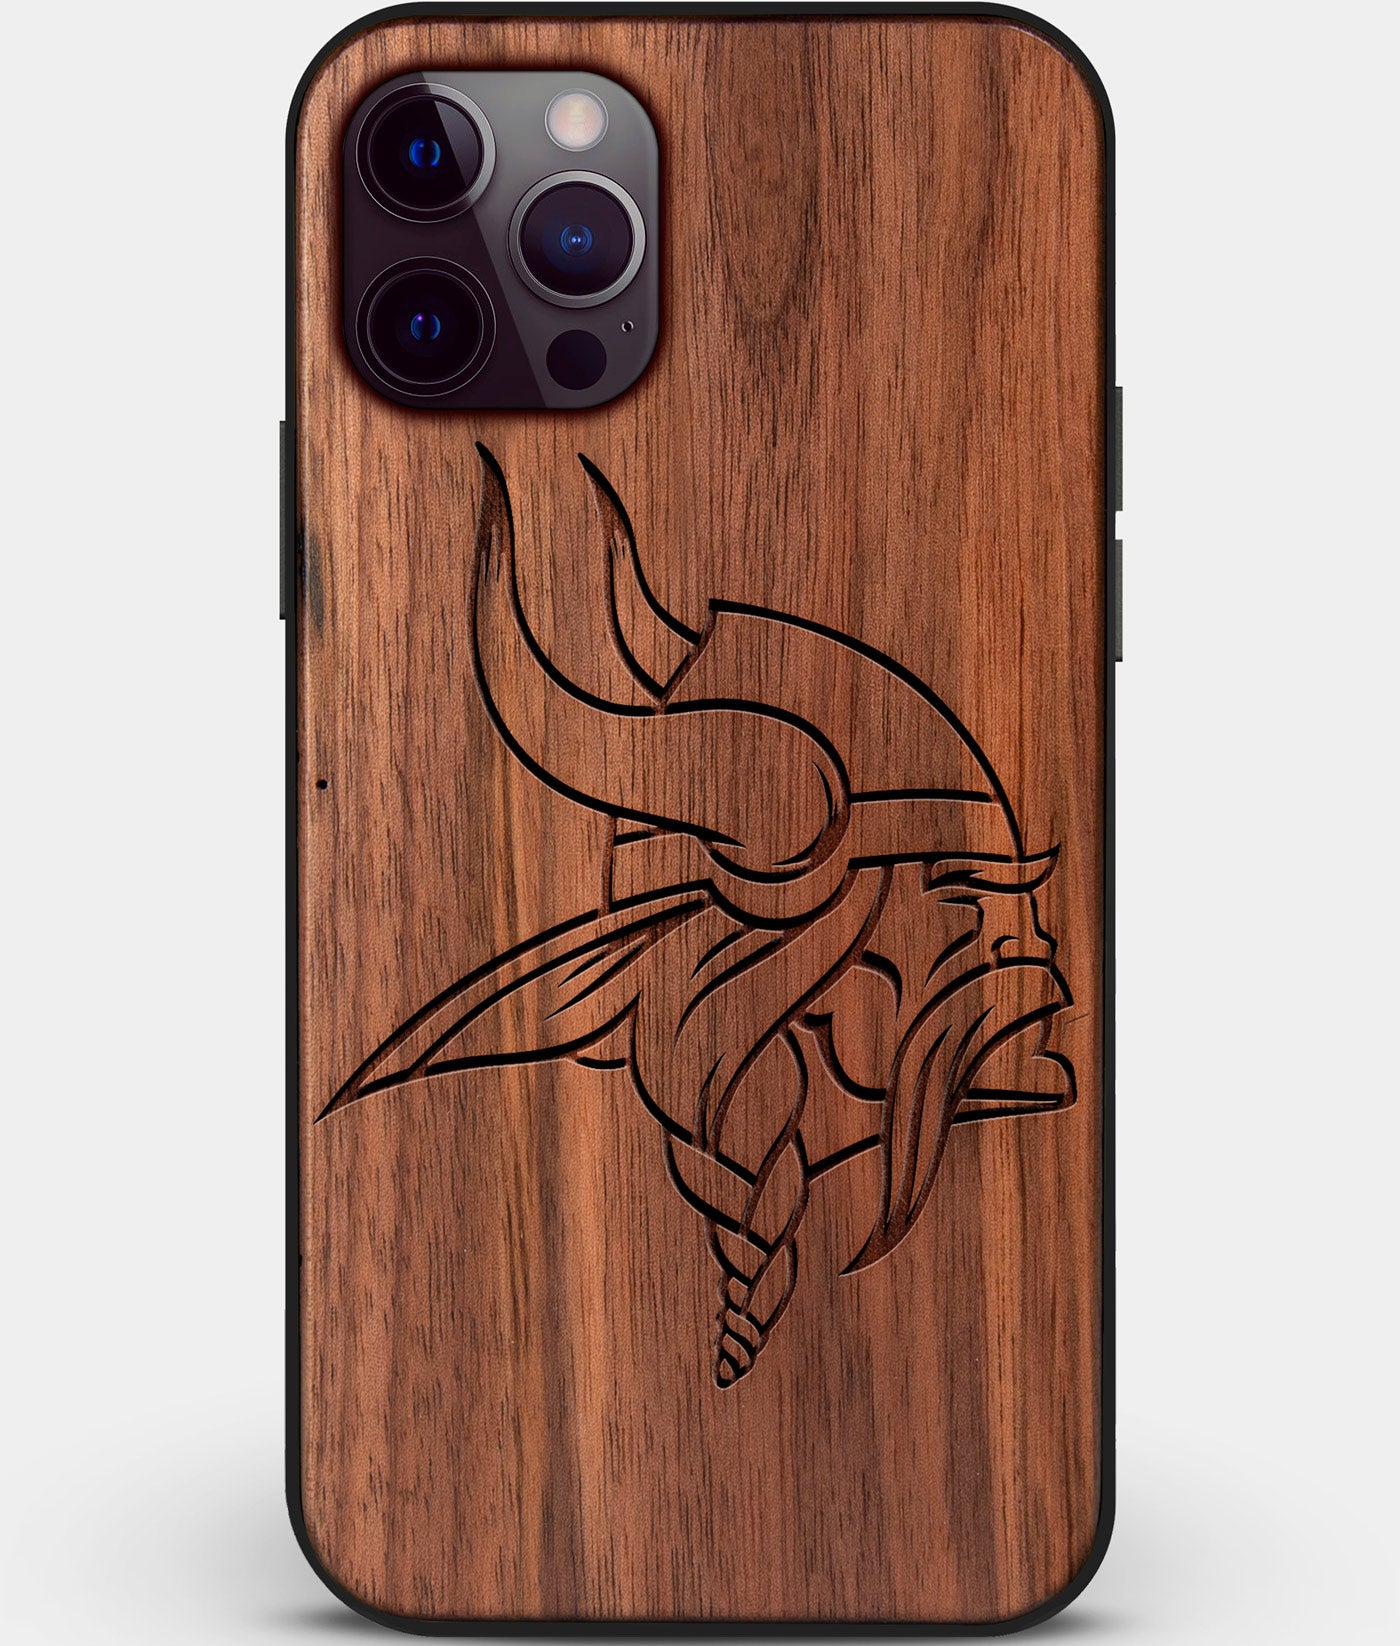 Custom Carved Wood Minnesota Vikings iPhone 12 Pro Max Case | Personalized Walnut Wood Minnesota Vikings Cover, Birthday Gift, Gifts For Him, Monogrammed Gift For Fan | by Engraved In Nature